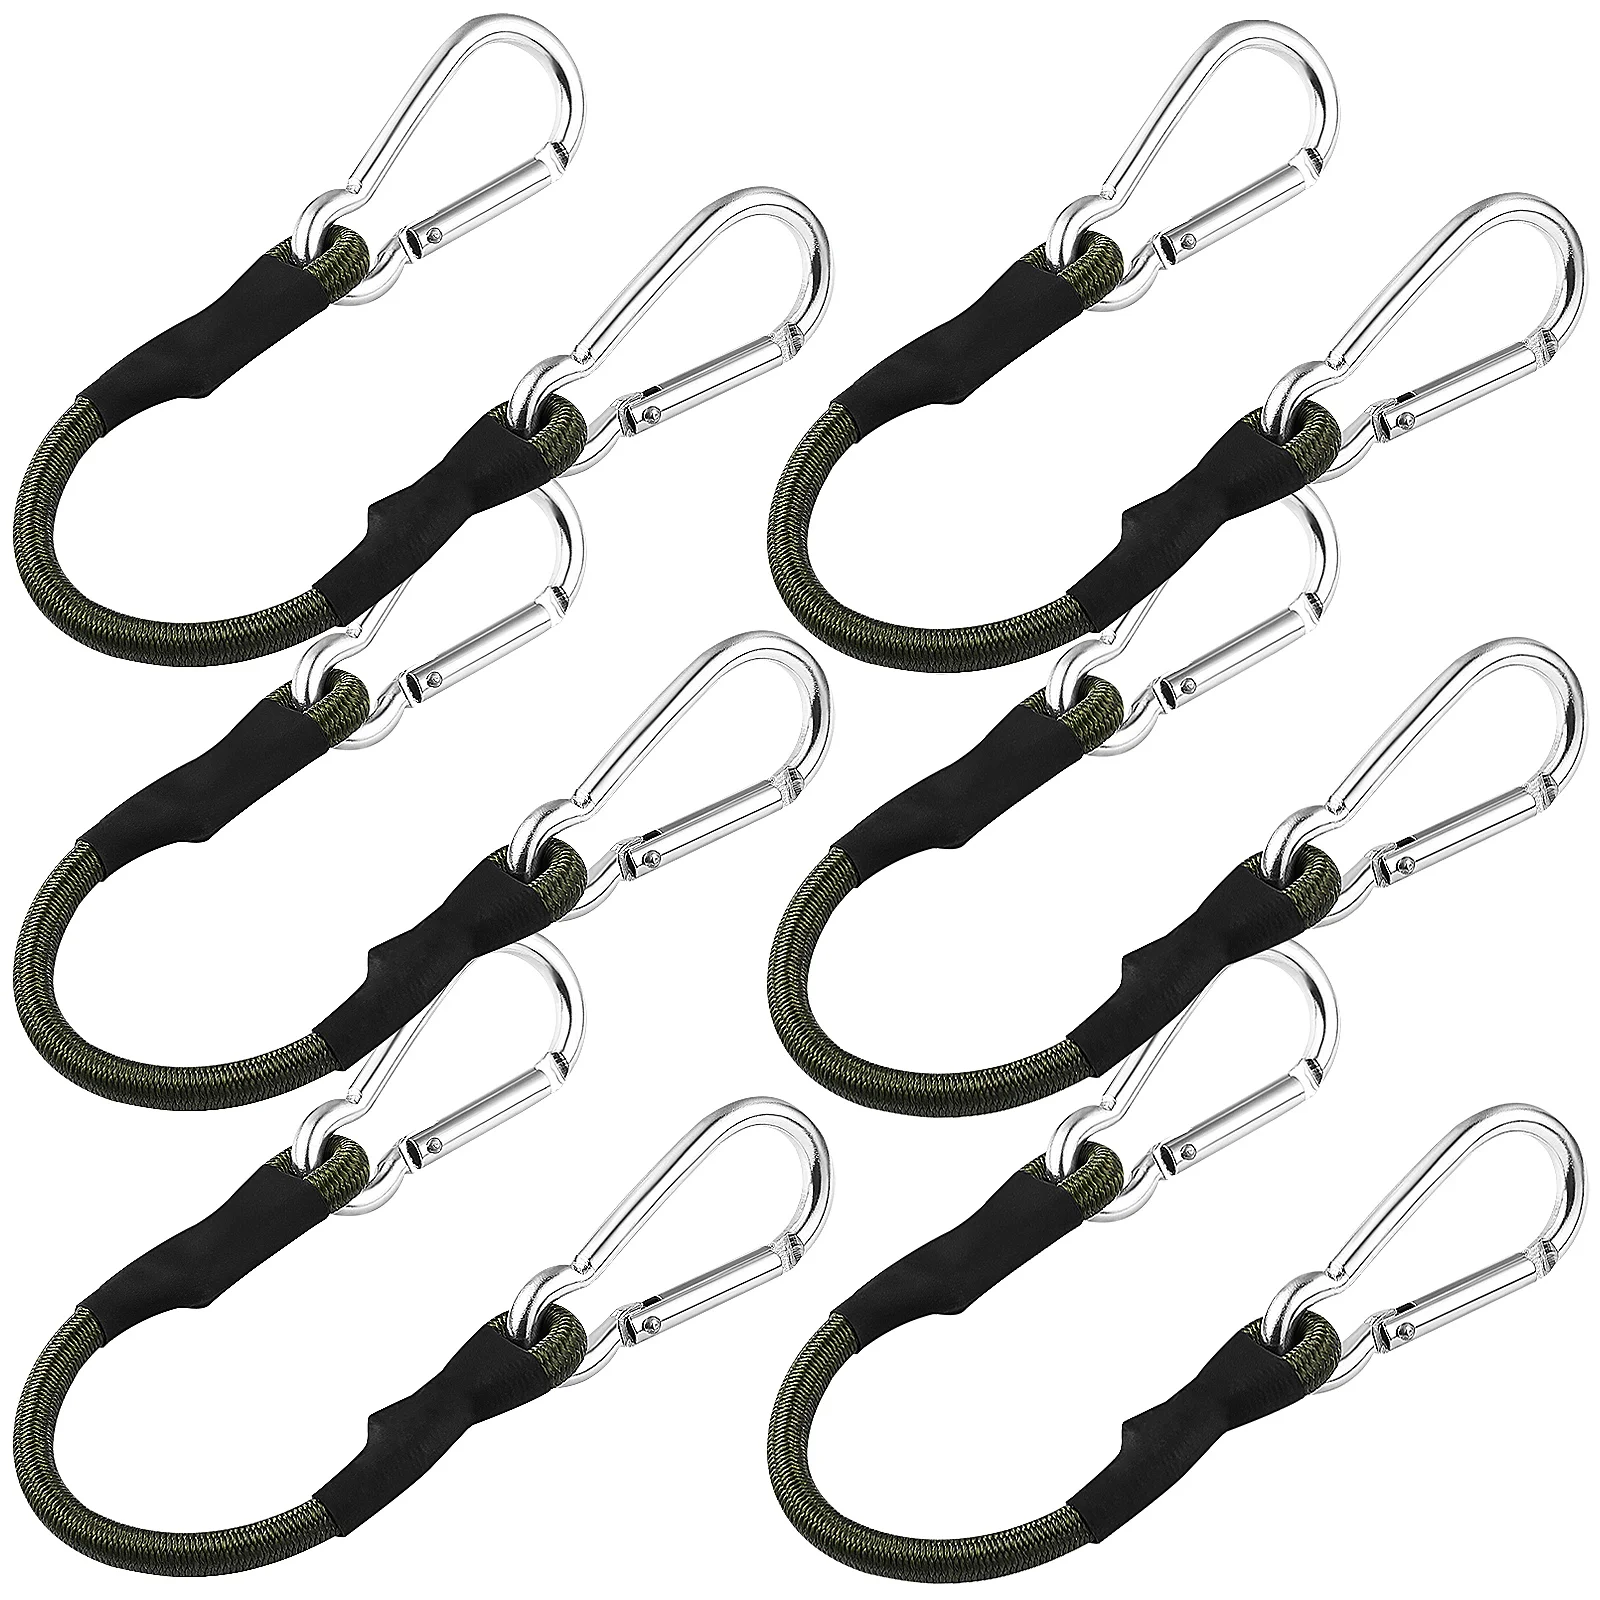 

6 Pcs Elastic Rope Luggage Ropes Bungee Cords Heavy Duty Clothes Line Outdoors Camping Straps Black Tent Fixing Binding Belt